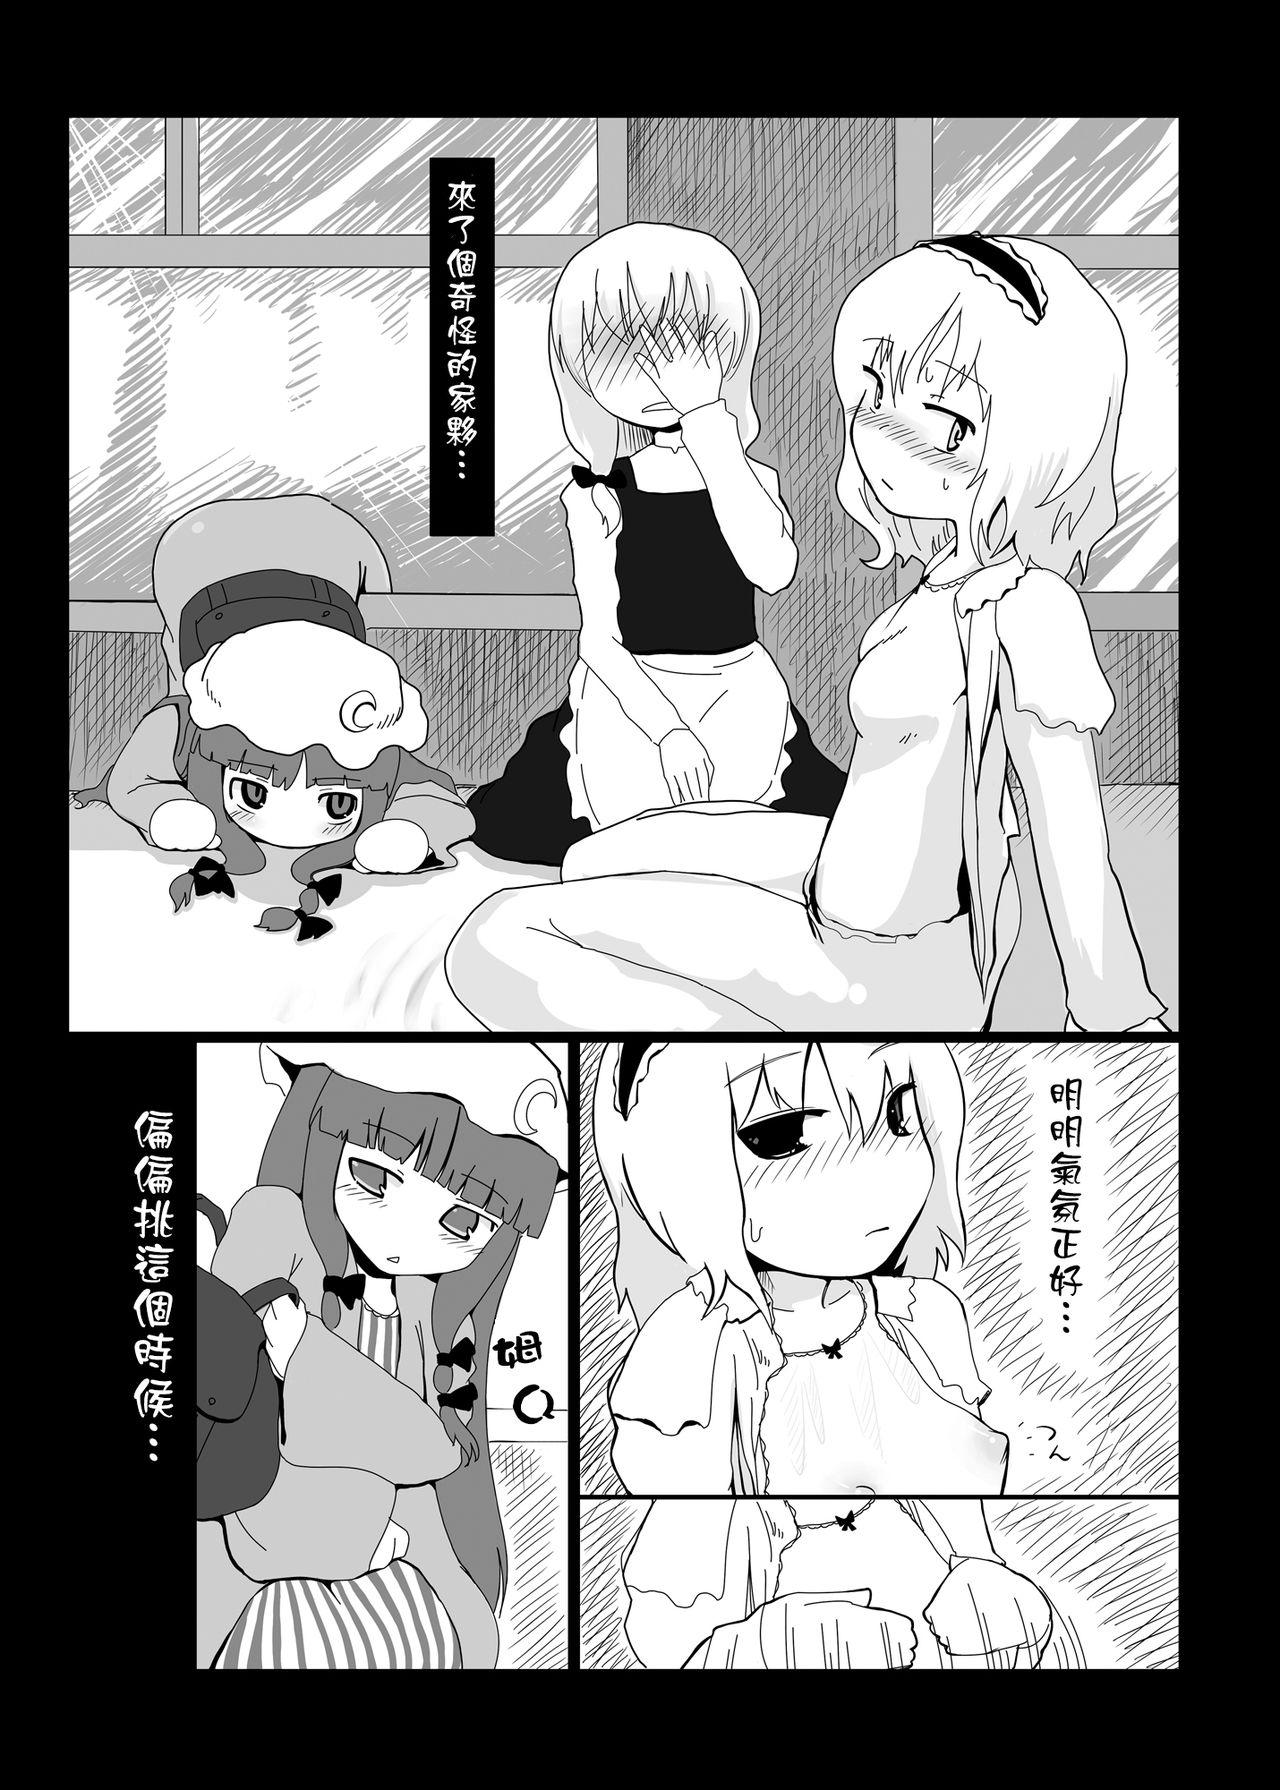 Sexcams Touhou Ero Atsume. - Touhou project Real Orgasm - Page 9